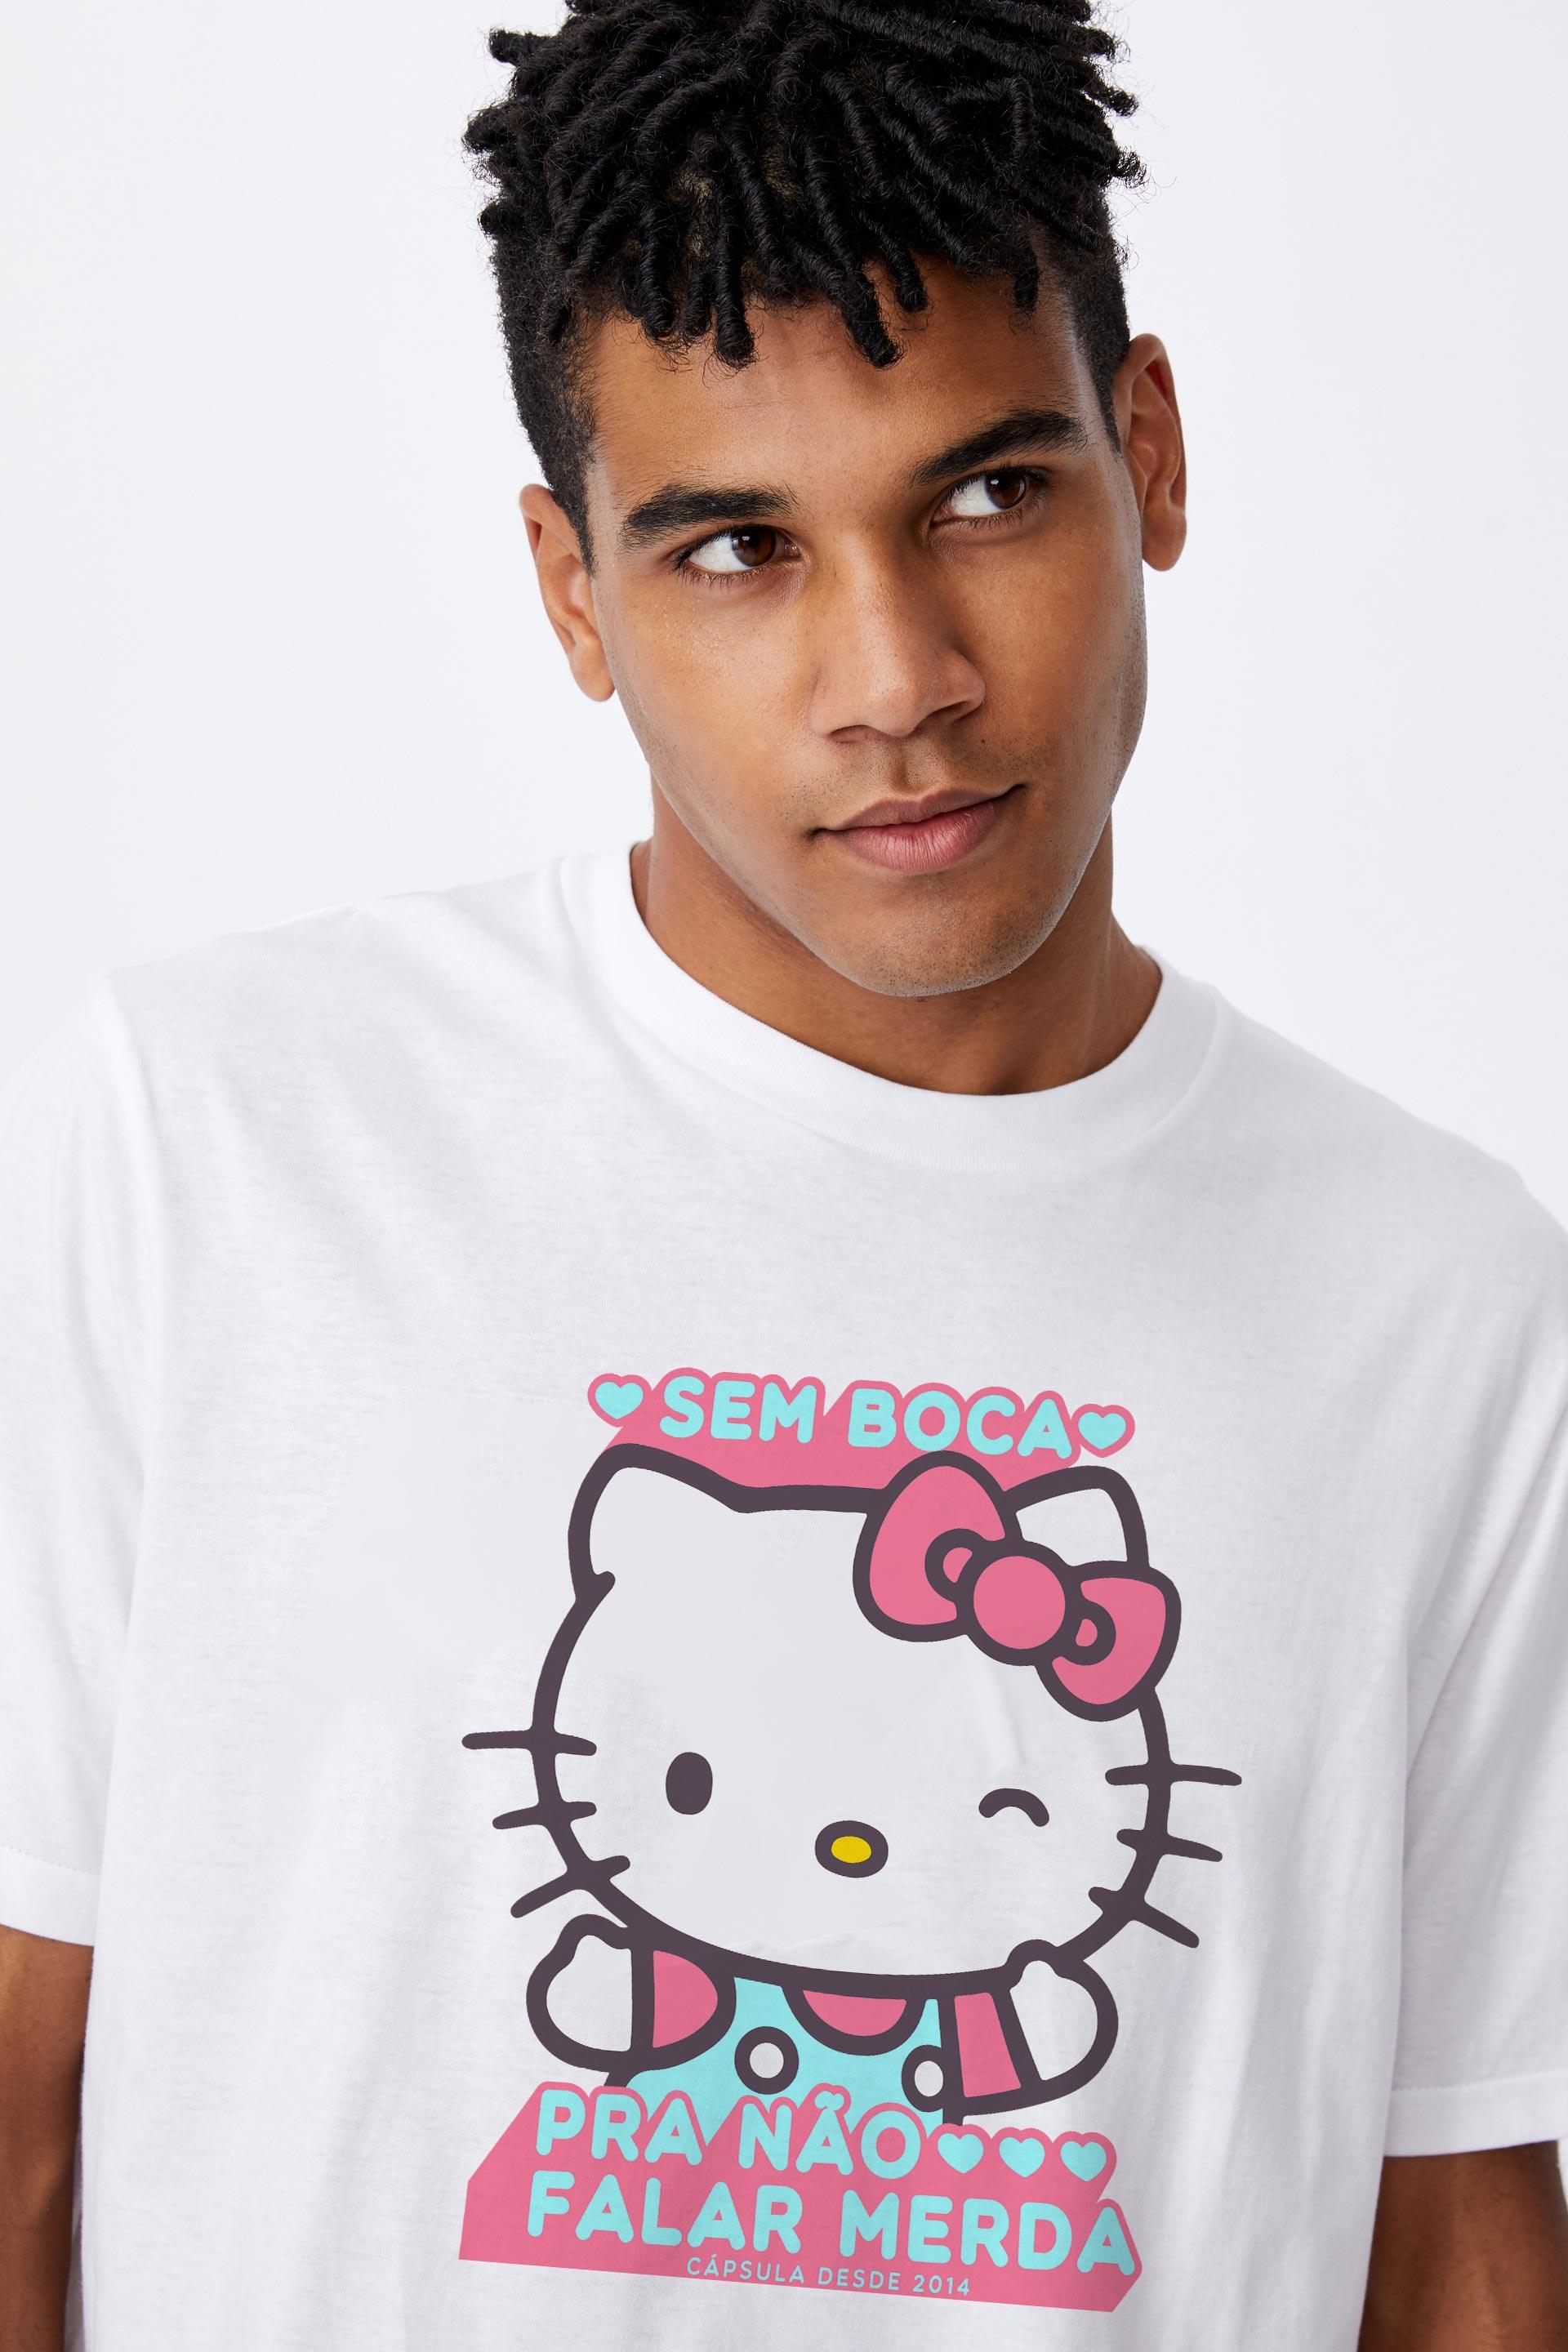 Hello Kitty Is On The Rise, But Why? – The Oarsman